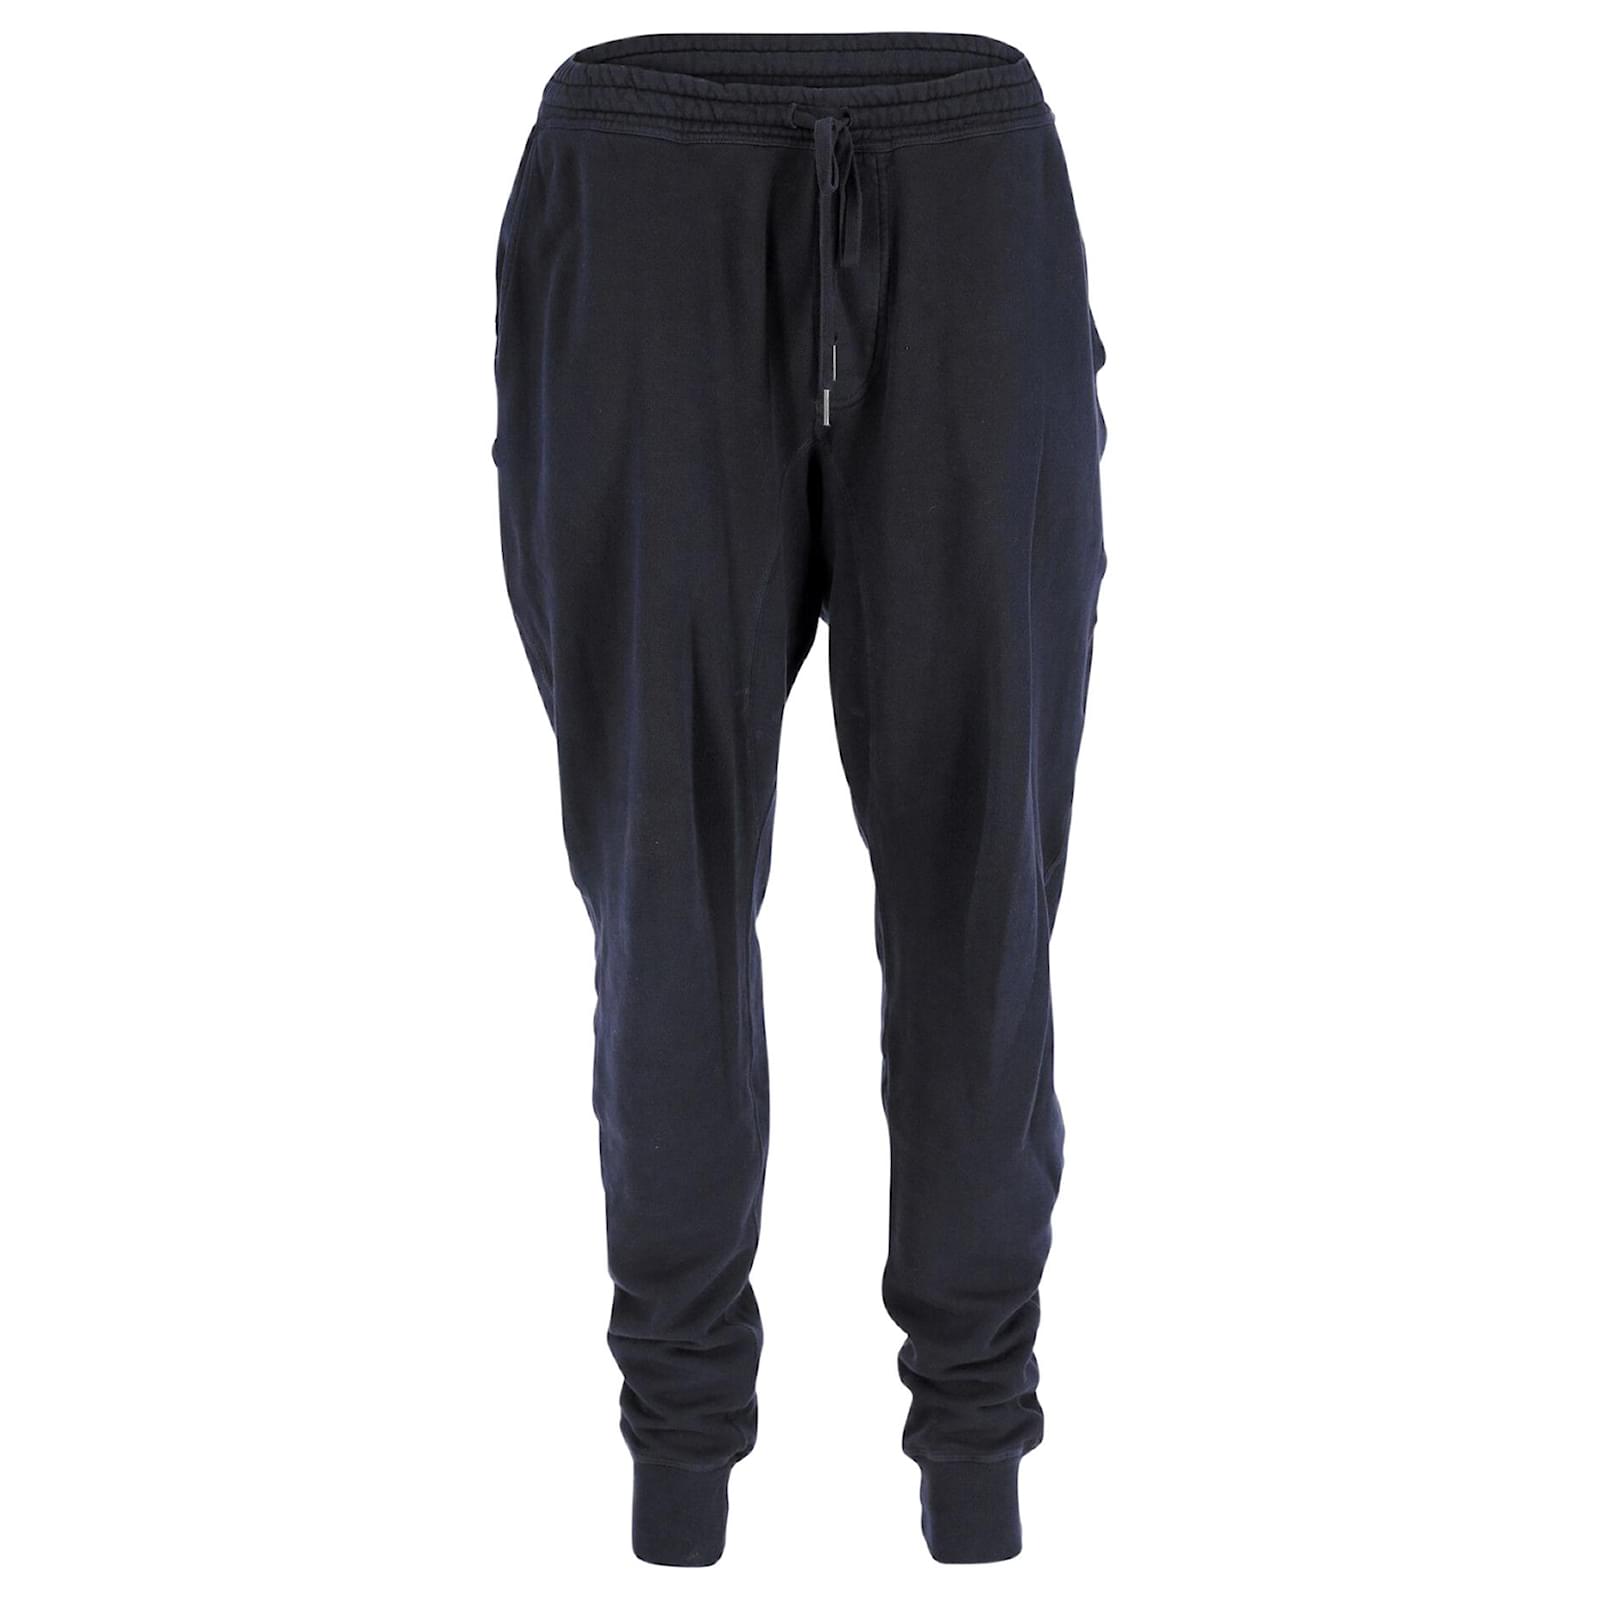 Relaxed Fit Cotton Drawstring Pants